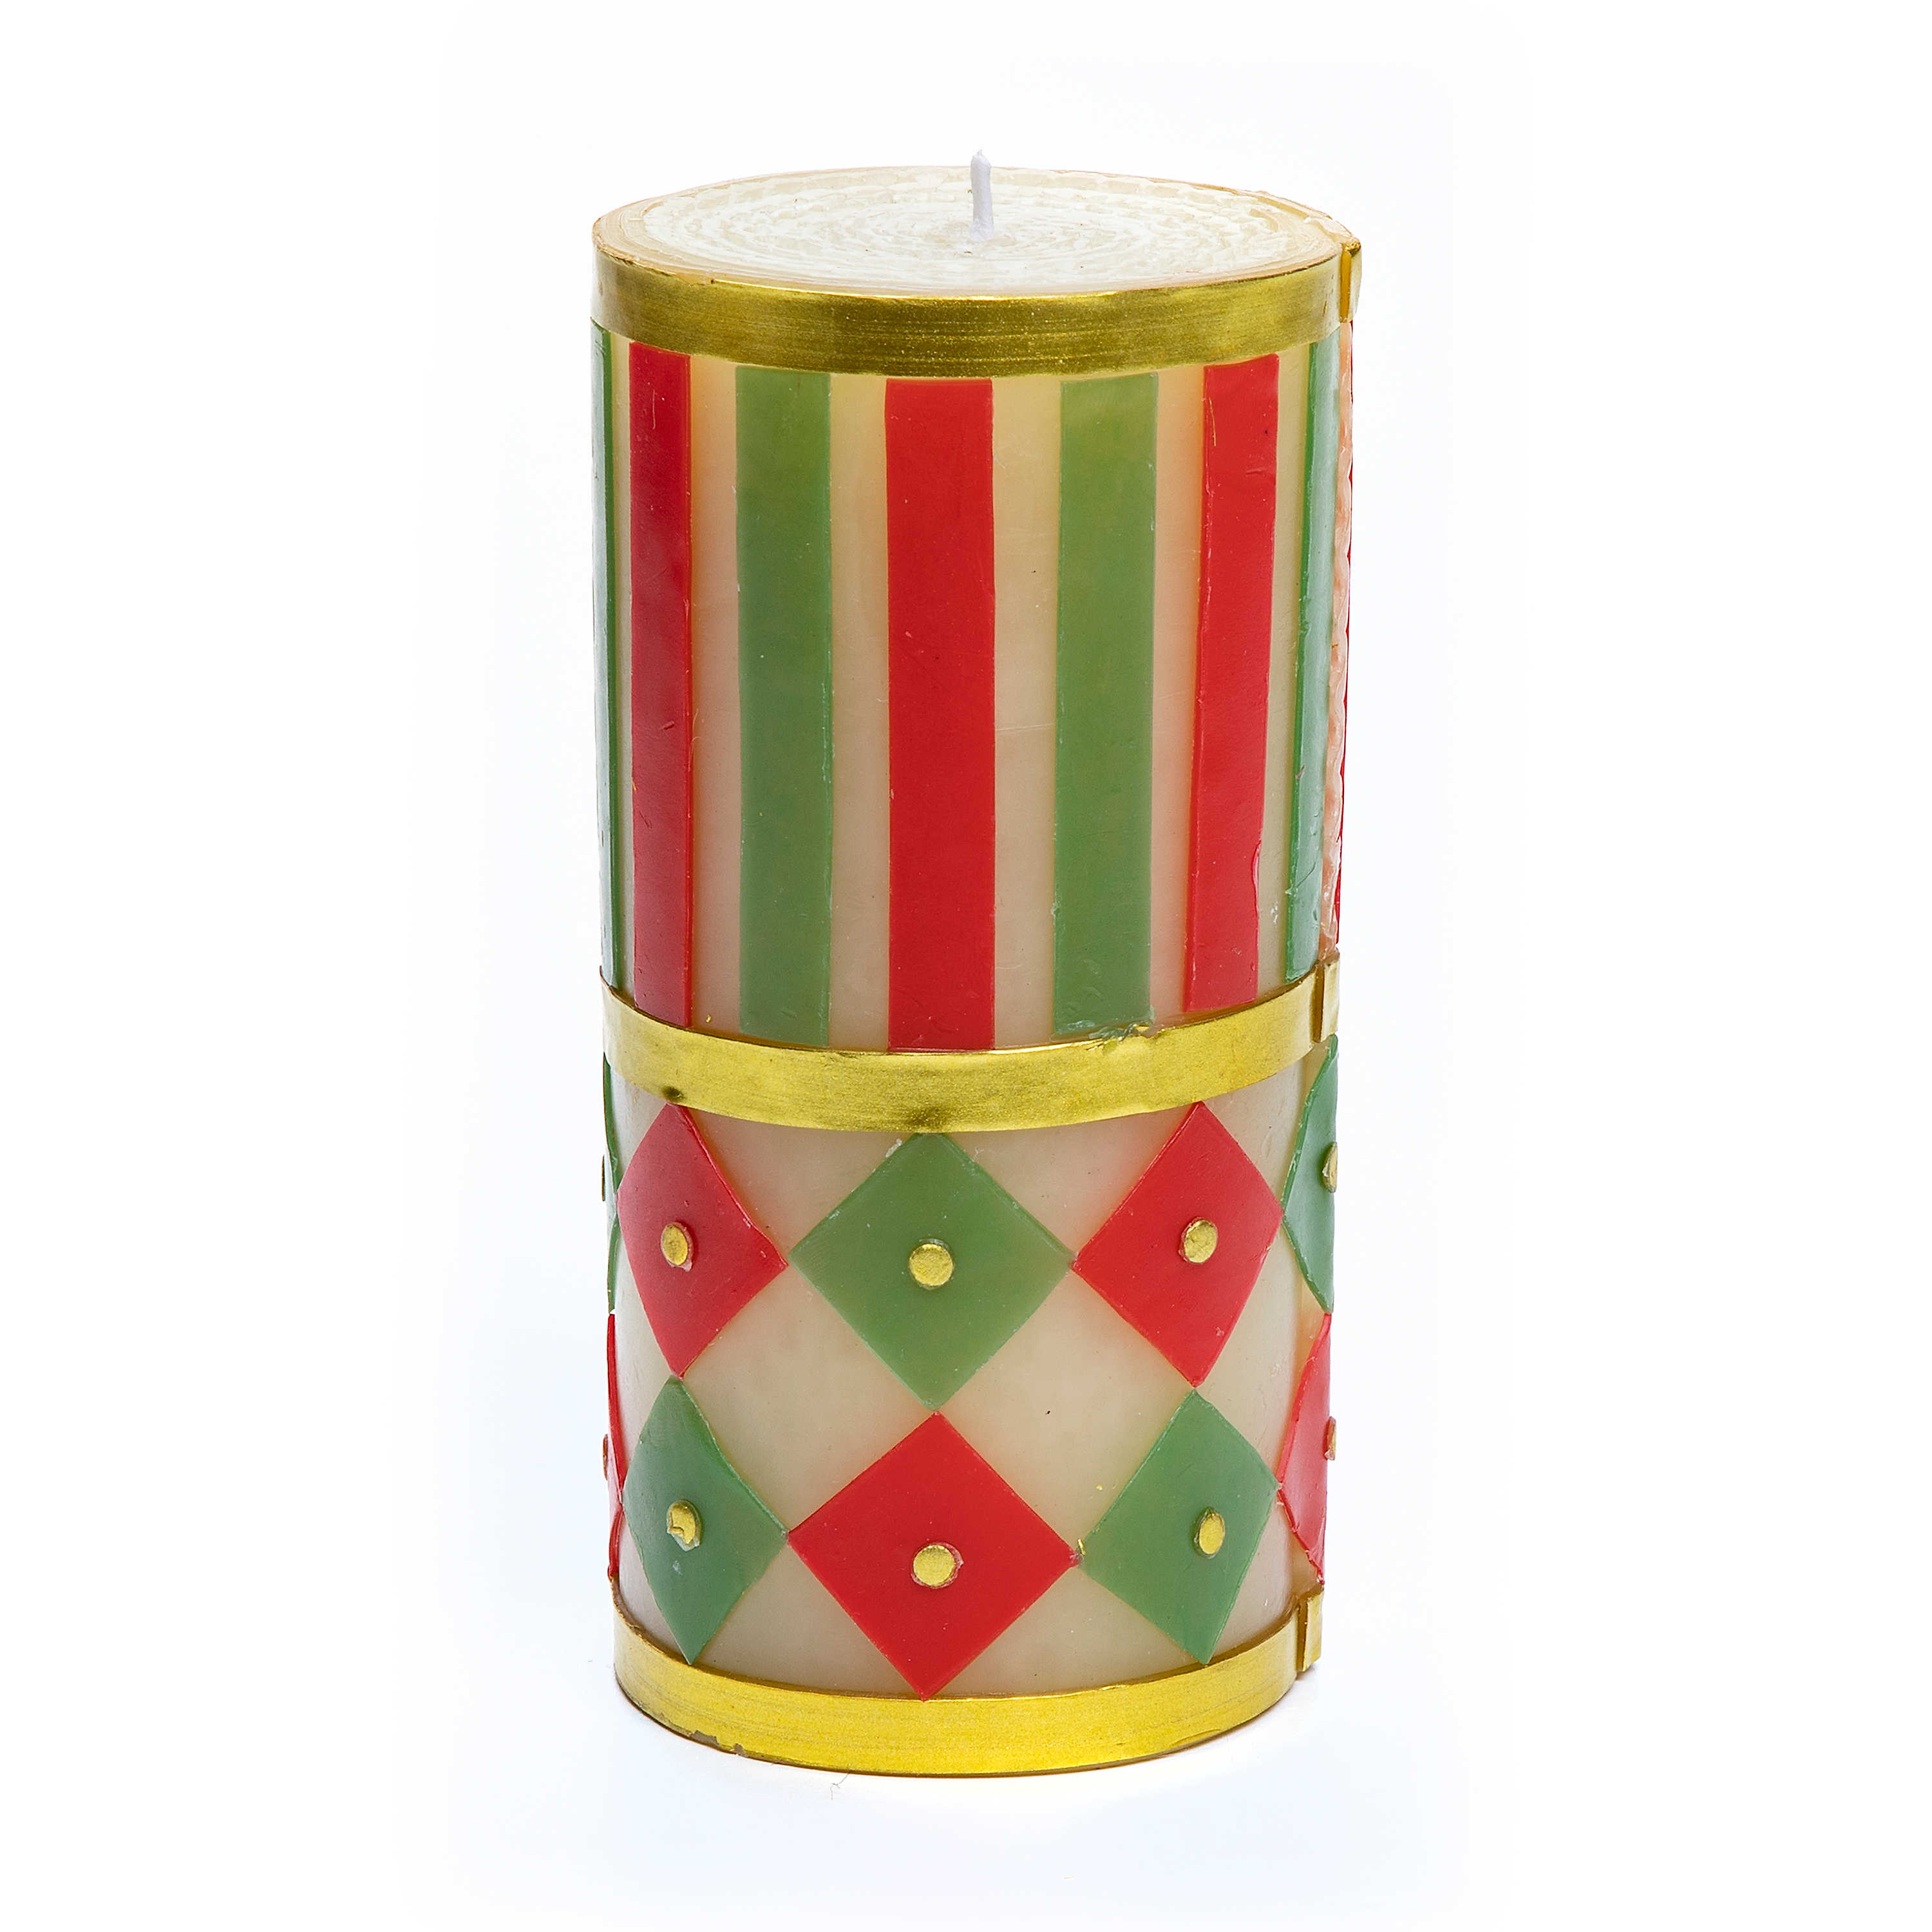 Jester Pillar Candle - Red, Green, & Gold - 6